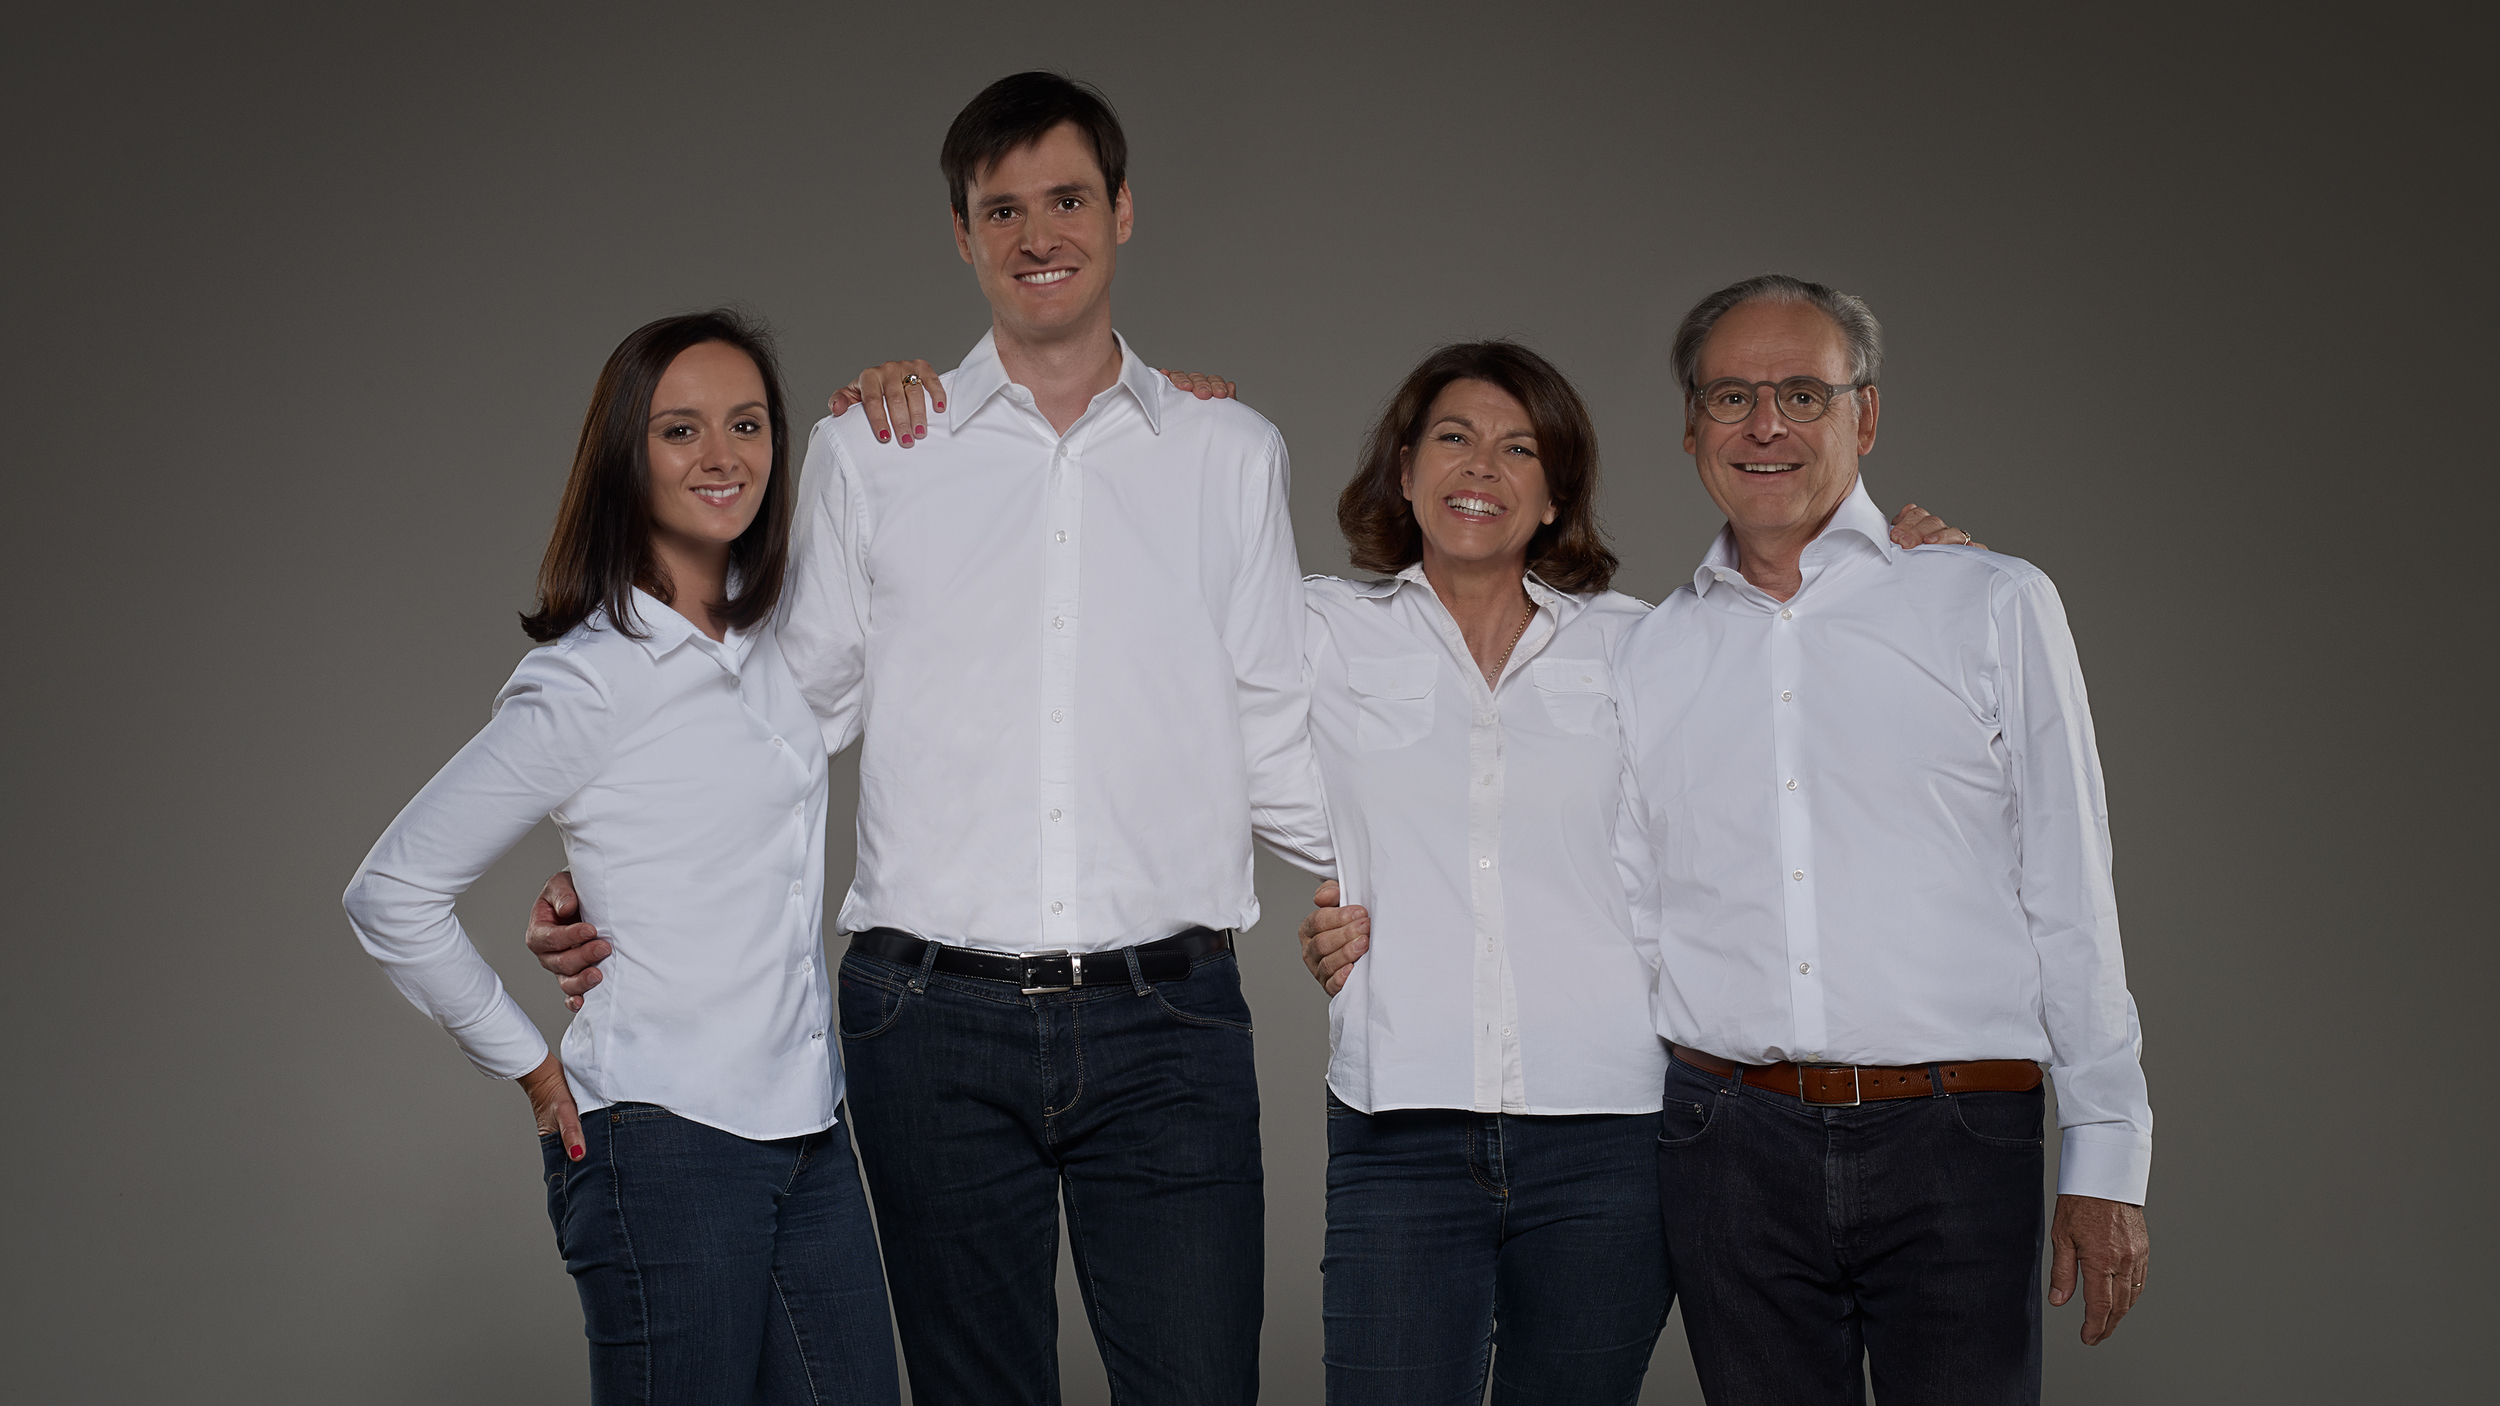 Decoster Family- Left to Right, Daughter-in-law Caroline, Son Ludovic, Parents Florence and Dominique Decoster (Photo credit: Chateau Fleur Cardinale)